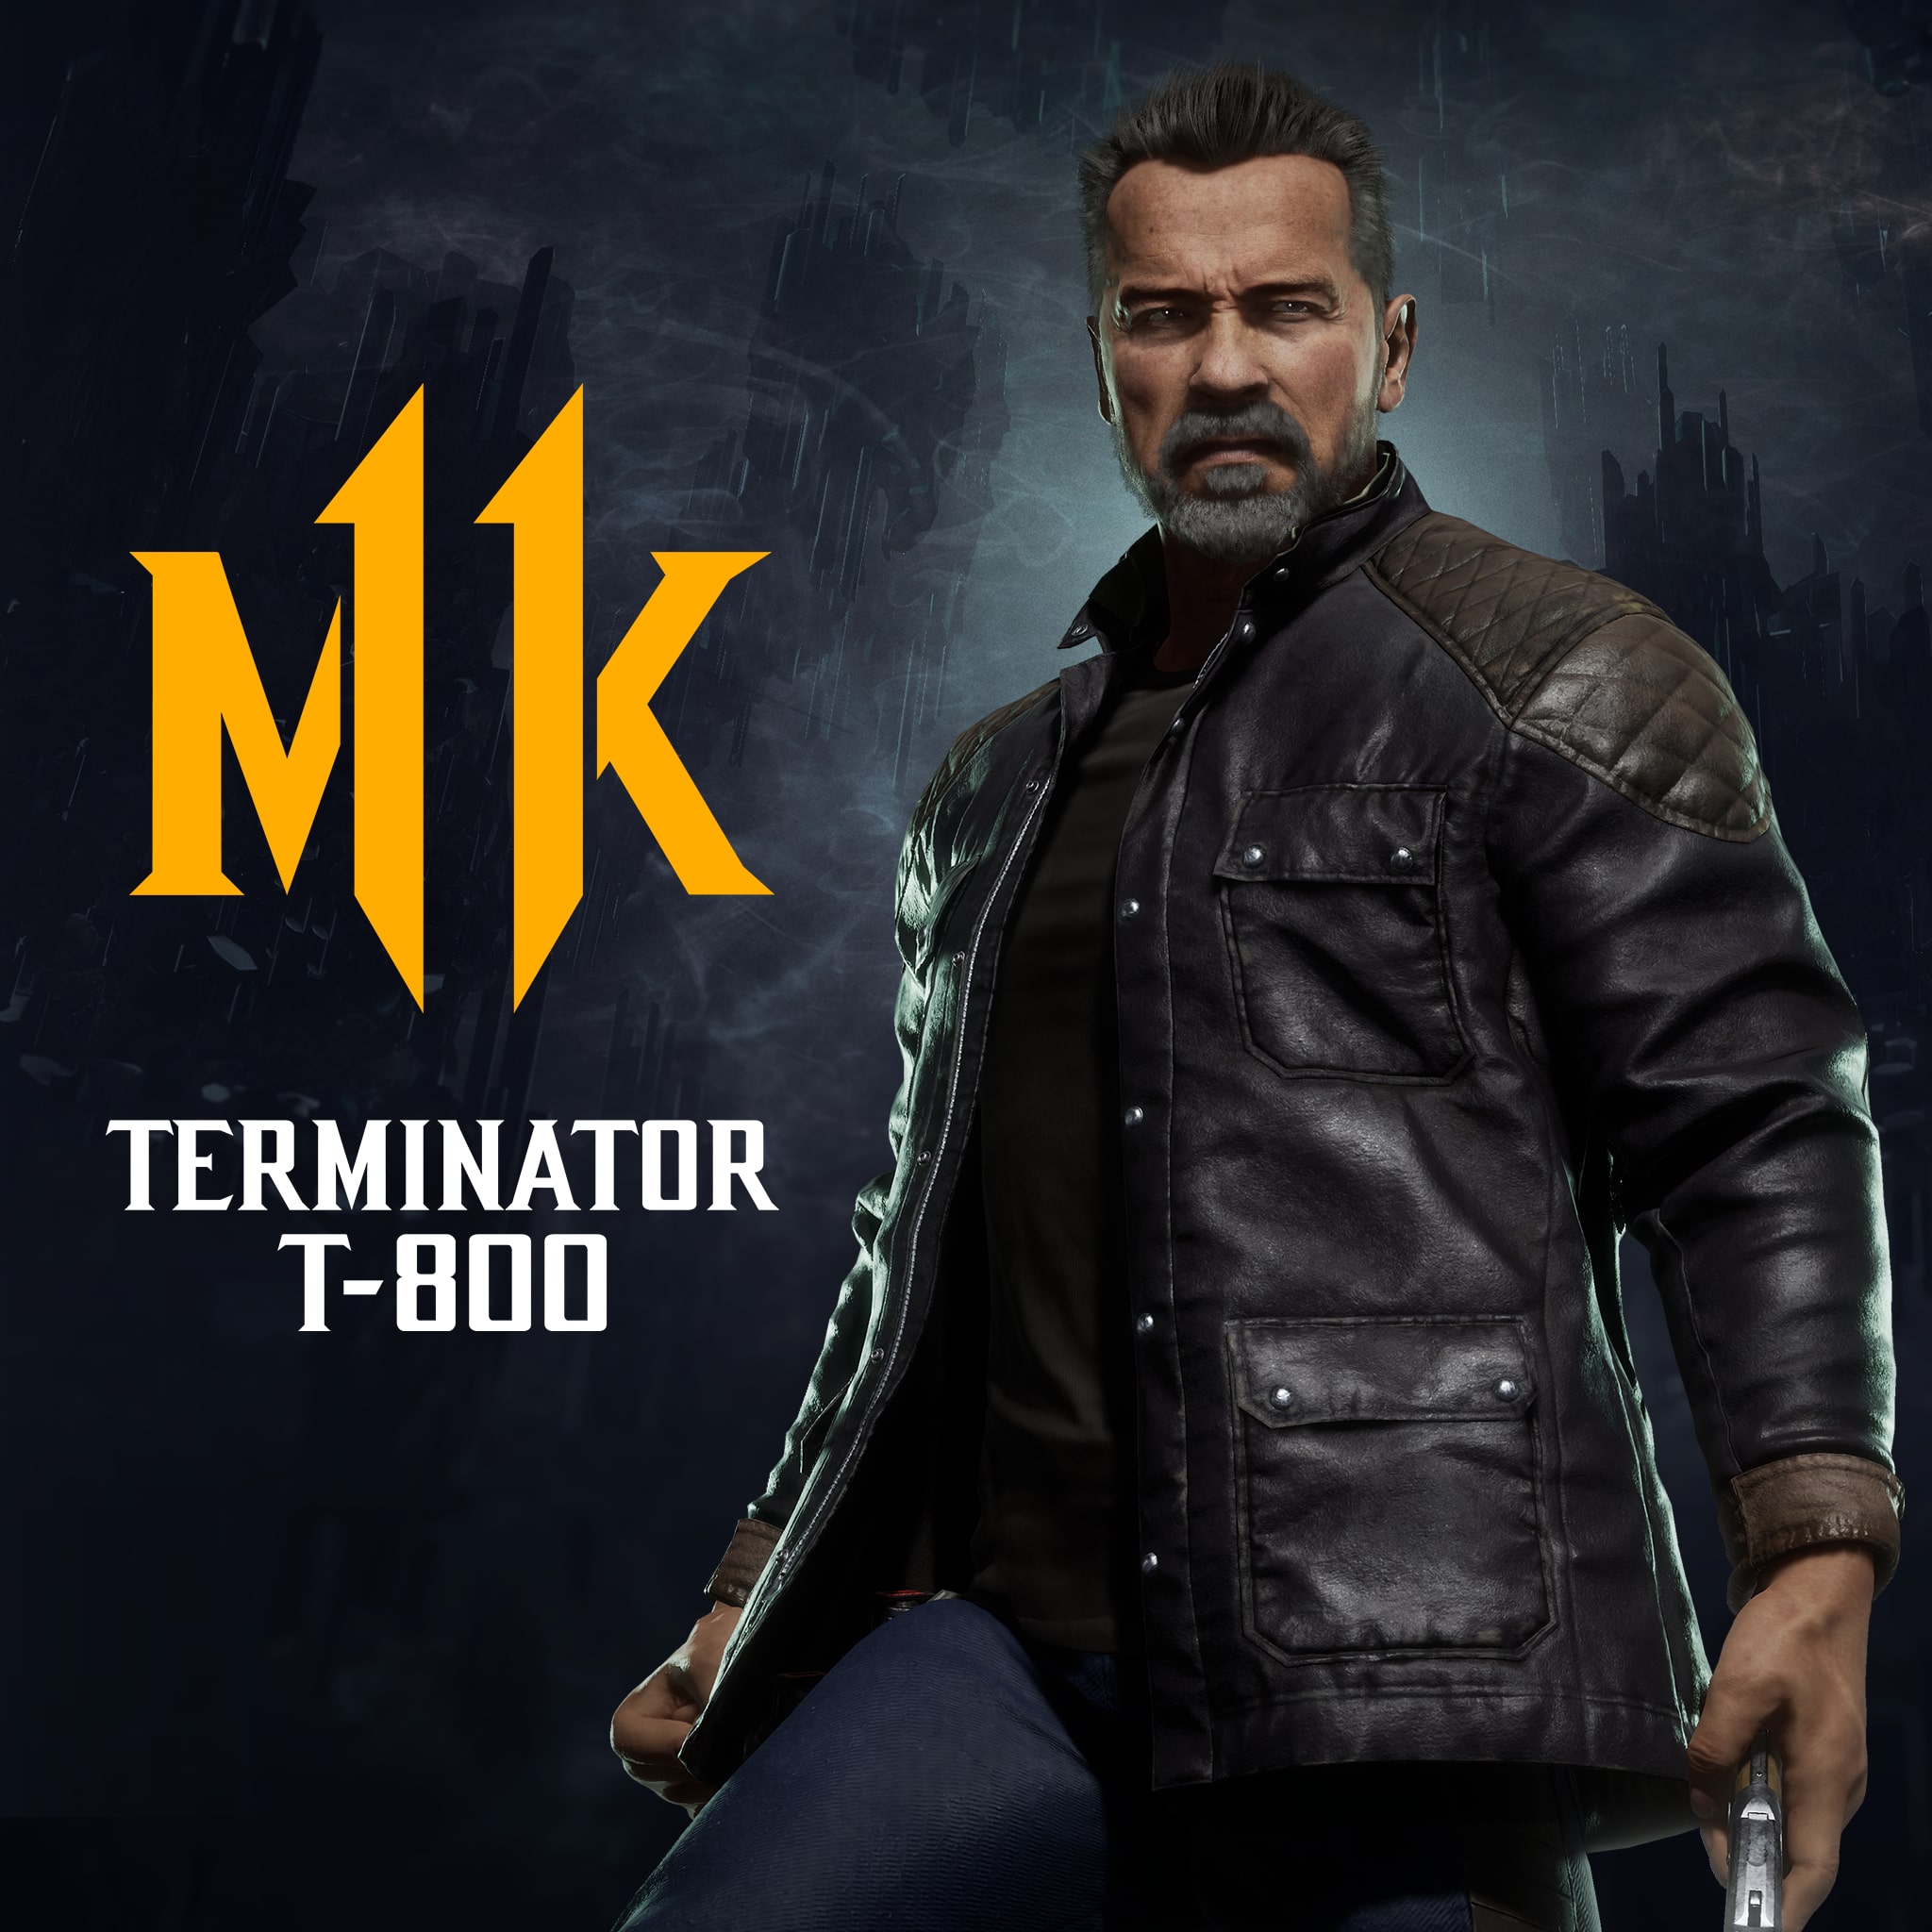 Mortal Kombat 11 – Terminator Theme, Fire and metal 🔥 The new, free MK11  PS4 theme features Scorpion and Terminator. More info from artist  Bosslogic:  By PlayStation